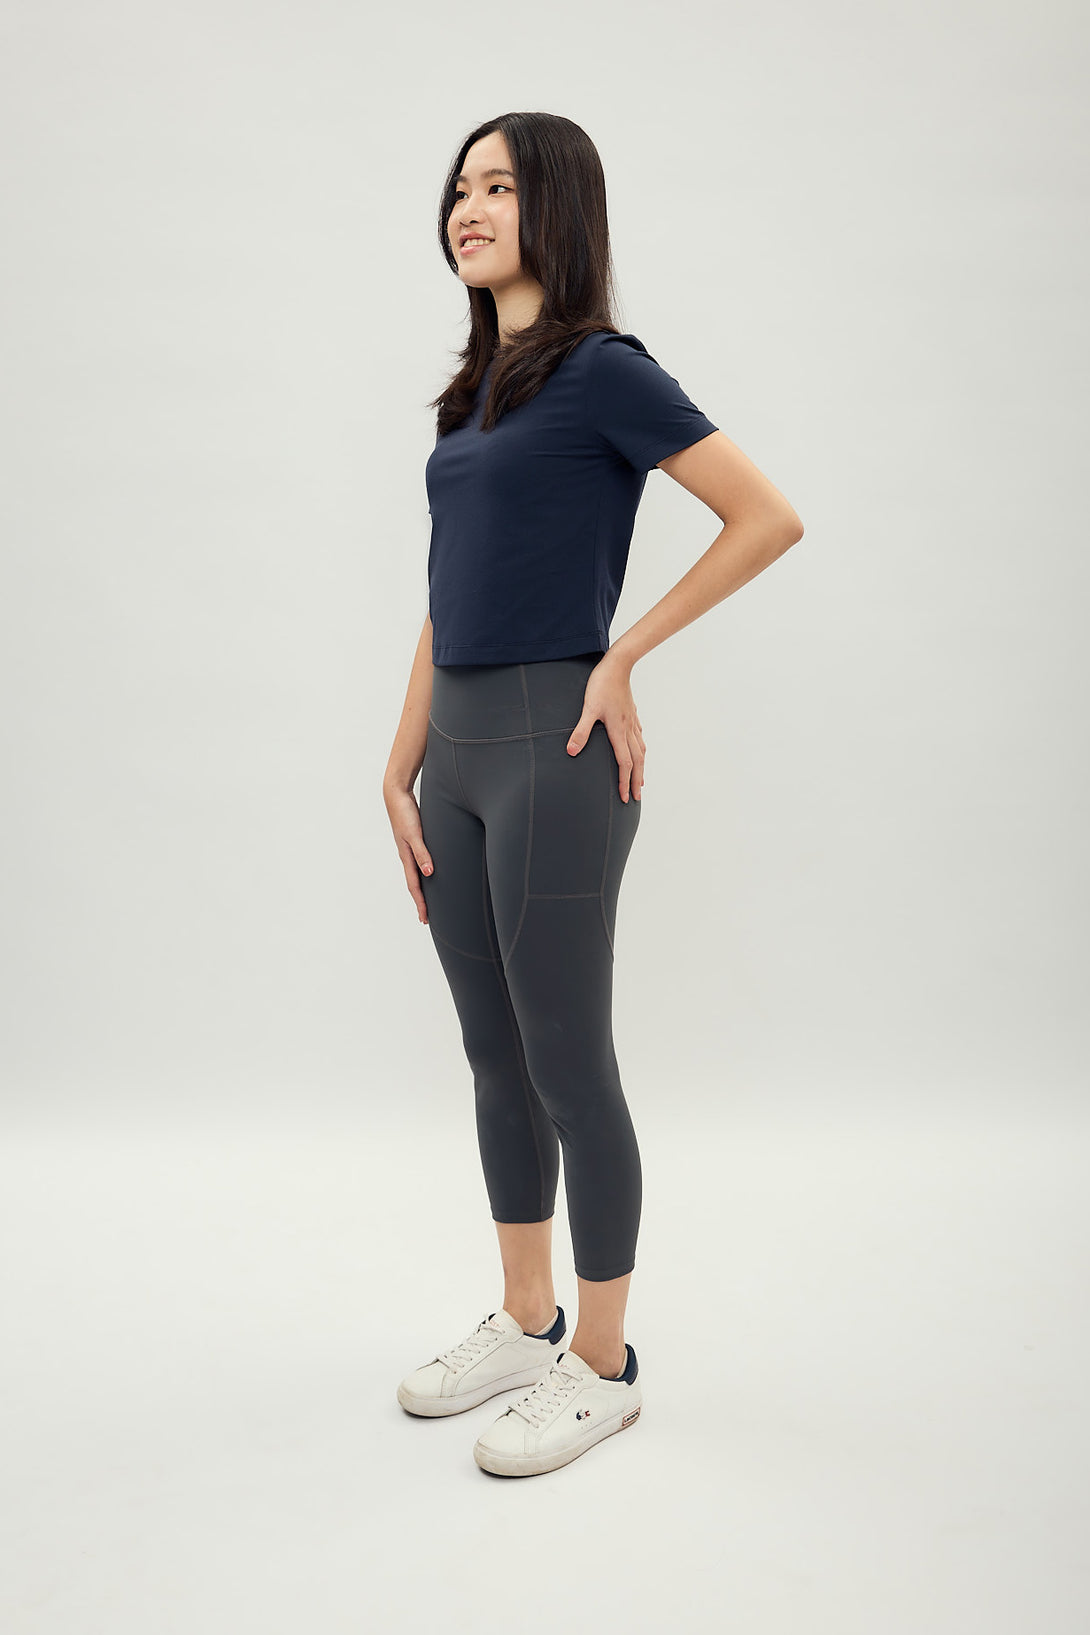 All Day Stretch Cropped Tee product image 3